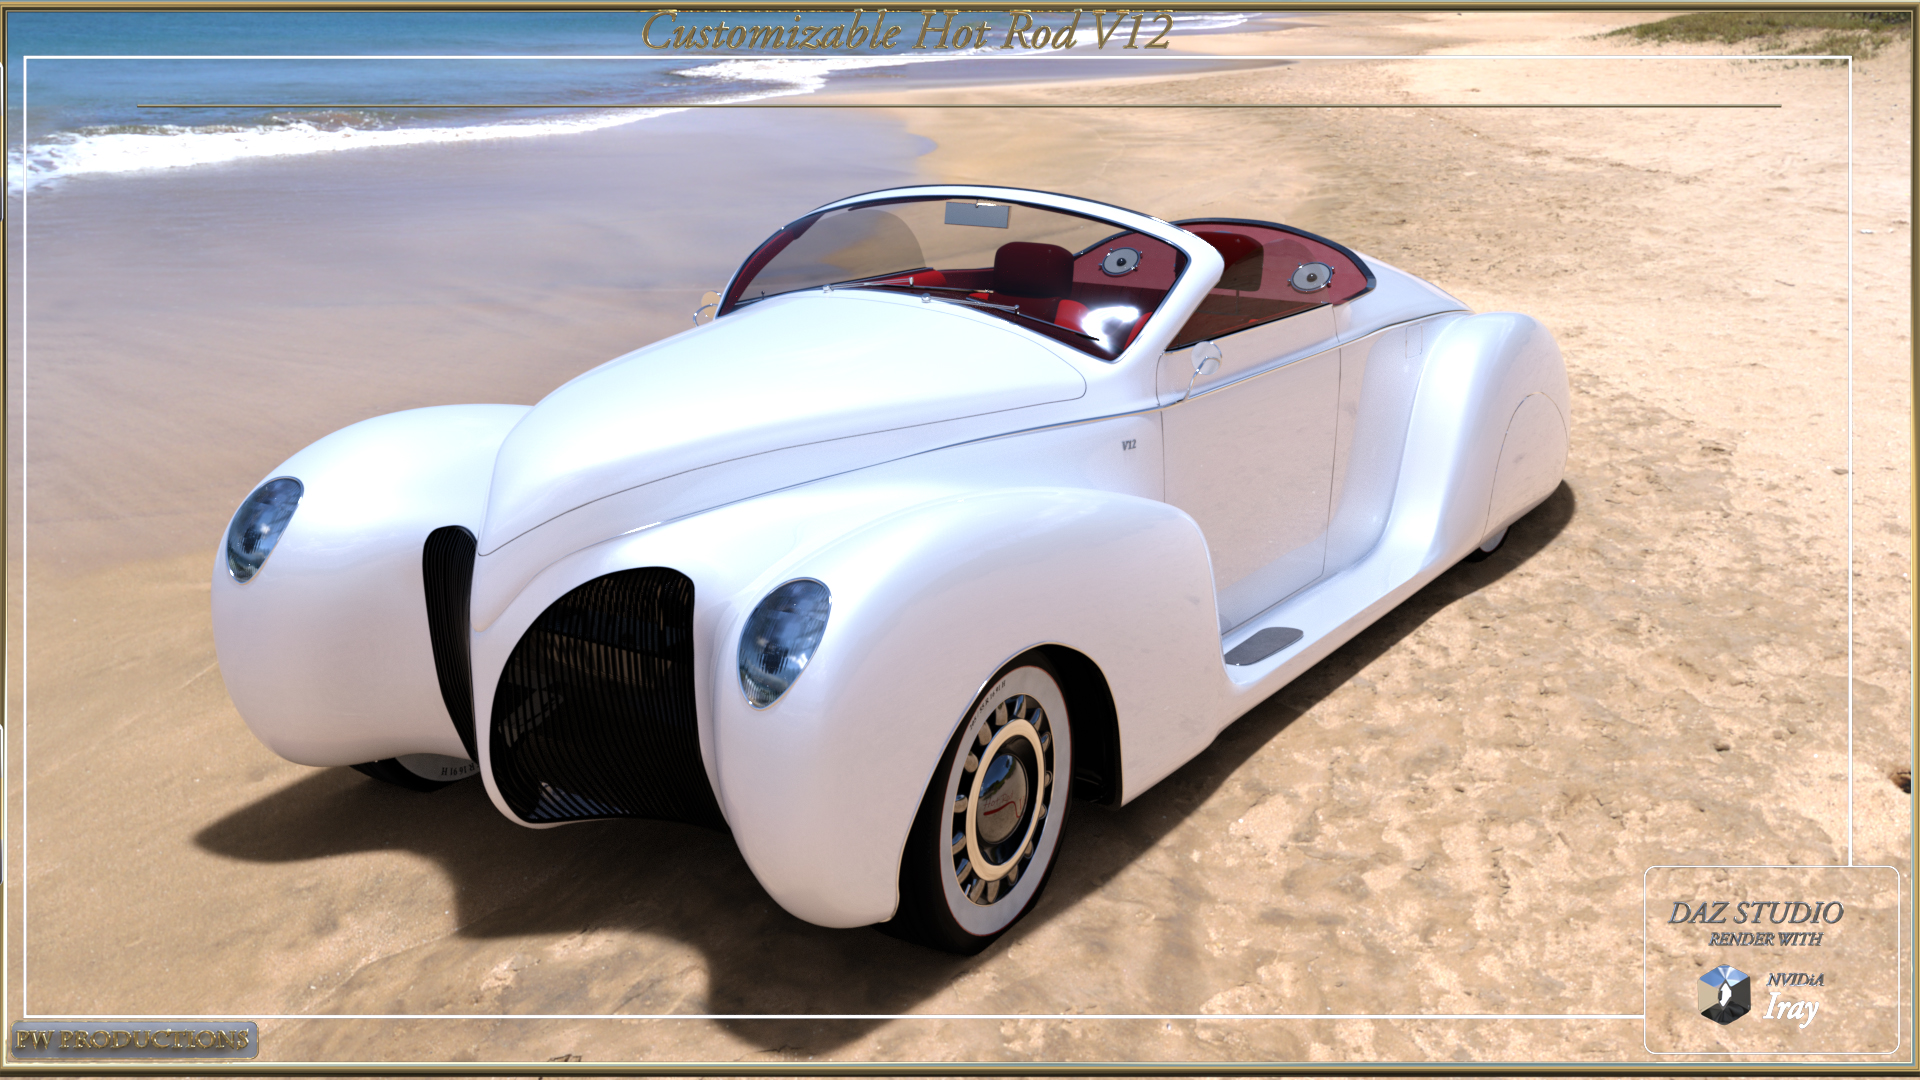 PW Customizable Hot Rod V12 by: PW Productions, 3D Models by Daz 3D